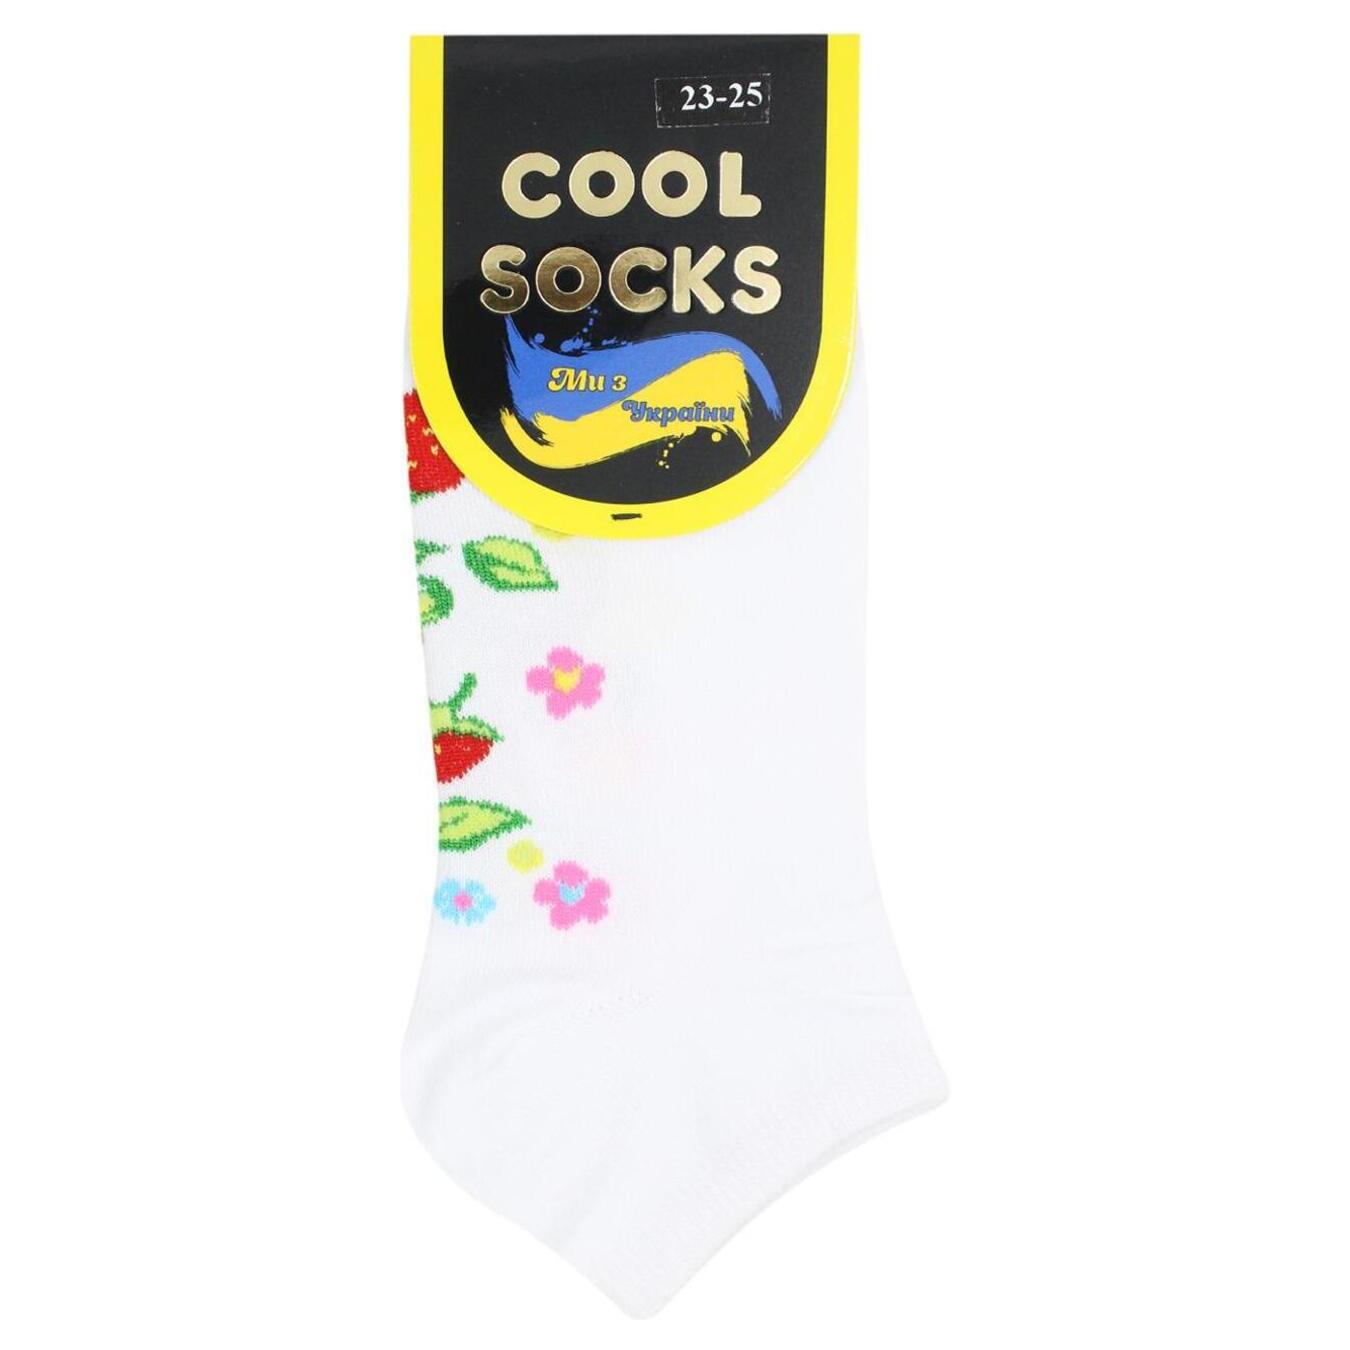 Cool Socks women's white short embroidered pattern 23-25 years.